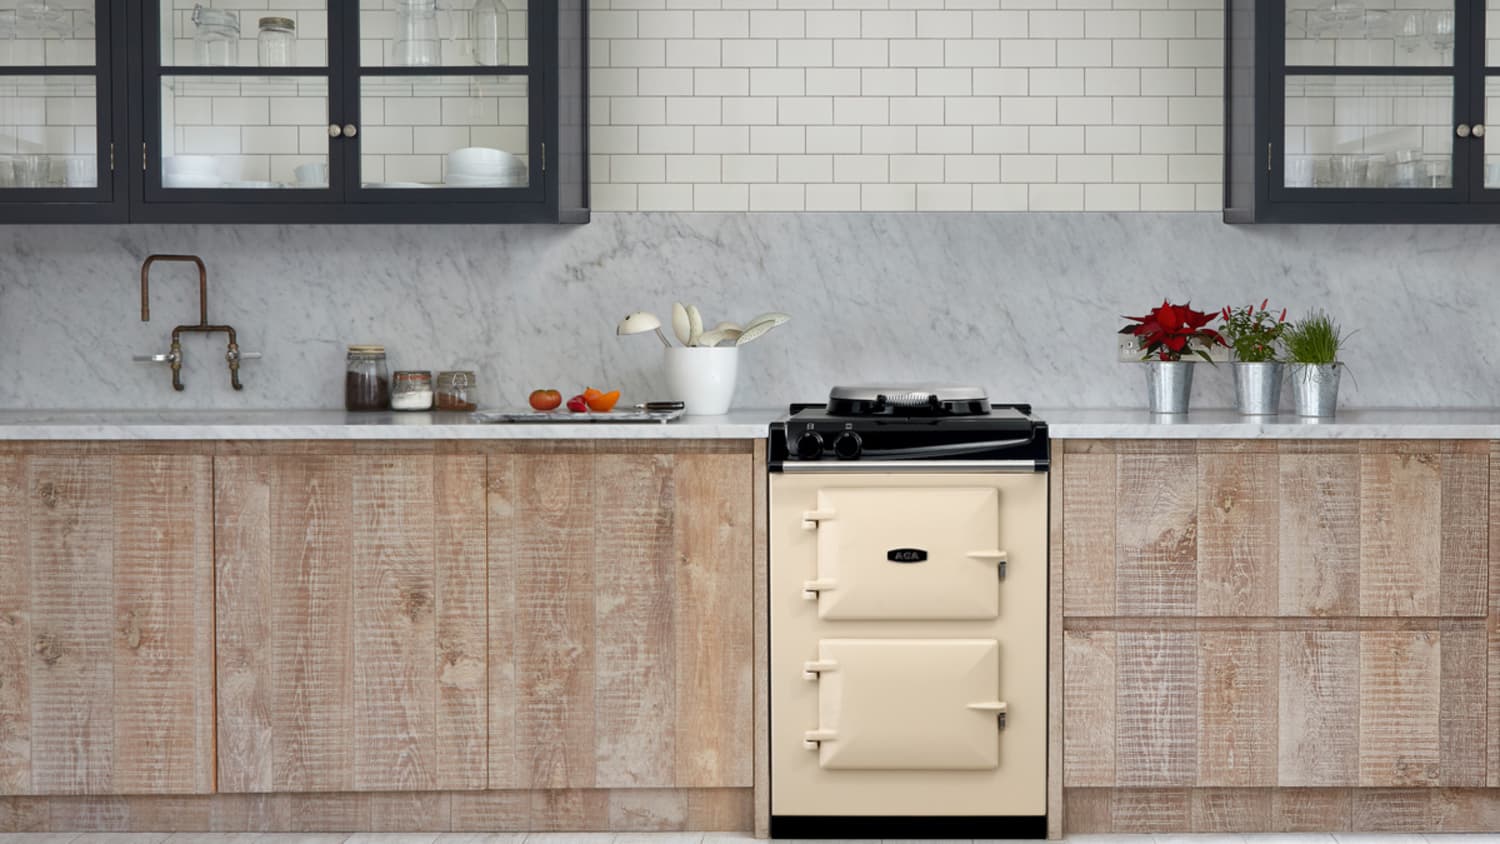 The 8 Best Small Dishwashers for Tiny Kitchens